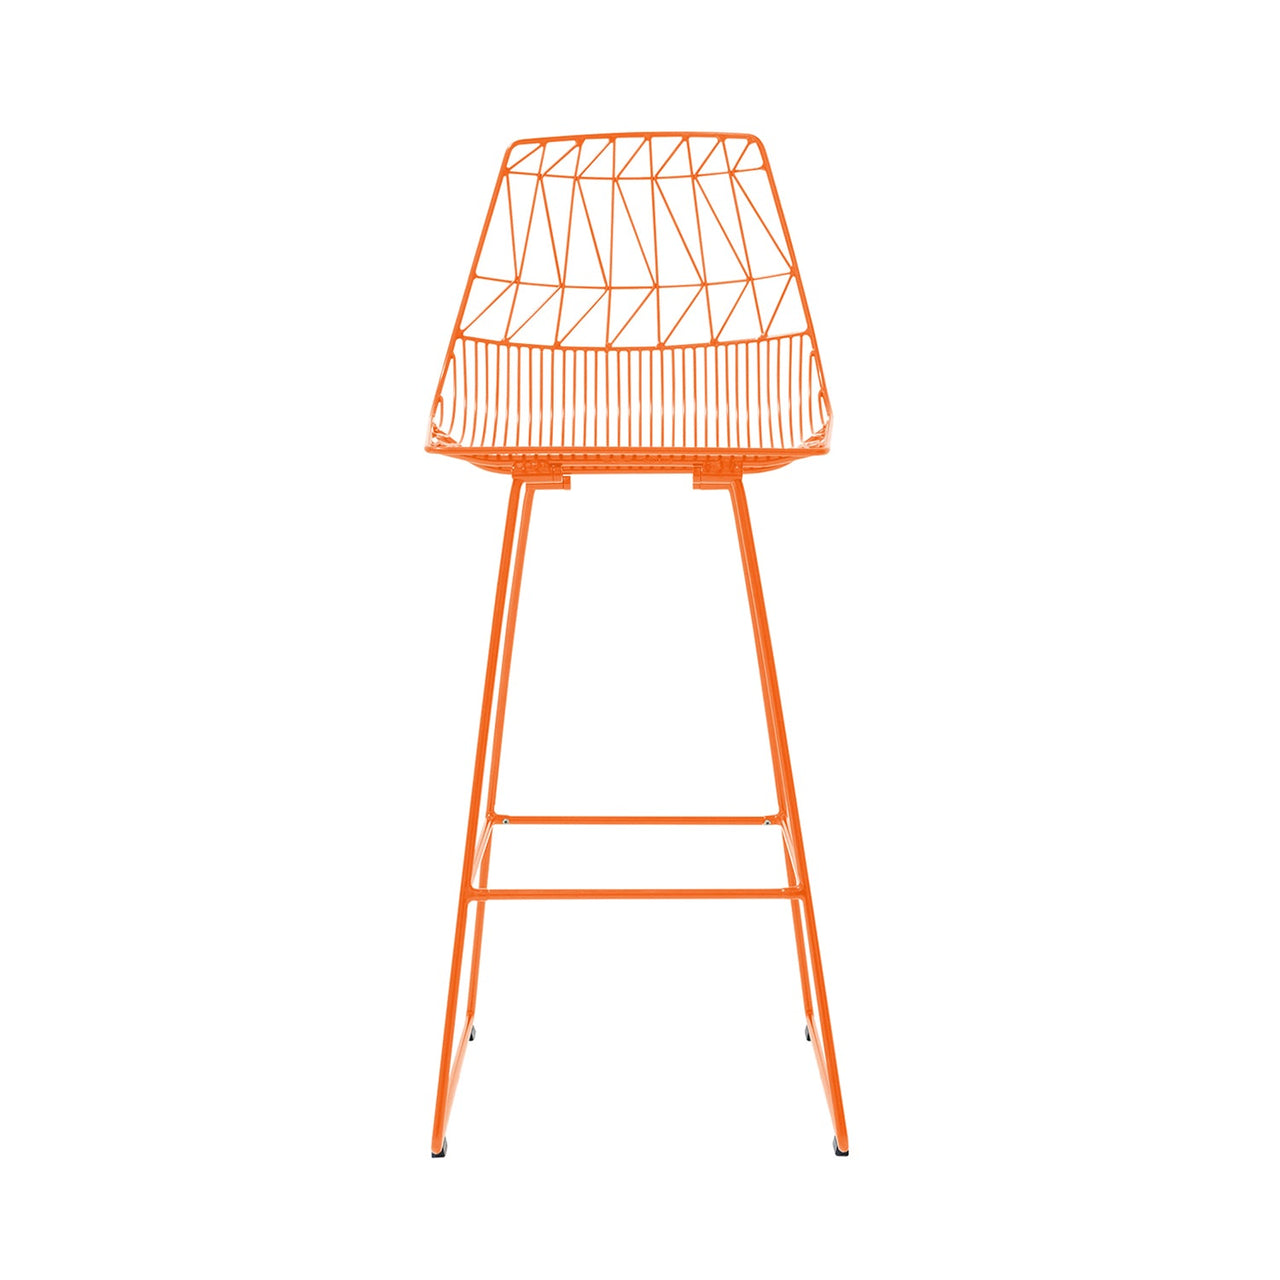 Lucy Bar Stool: Color + Orange + Without Seat Pad